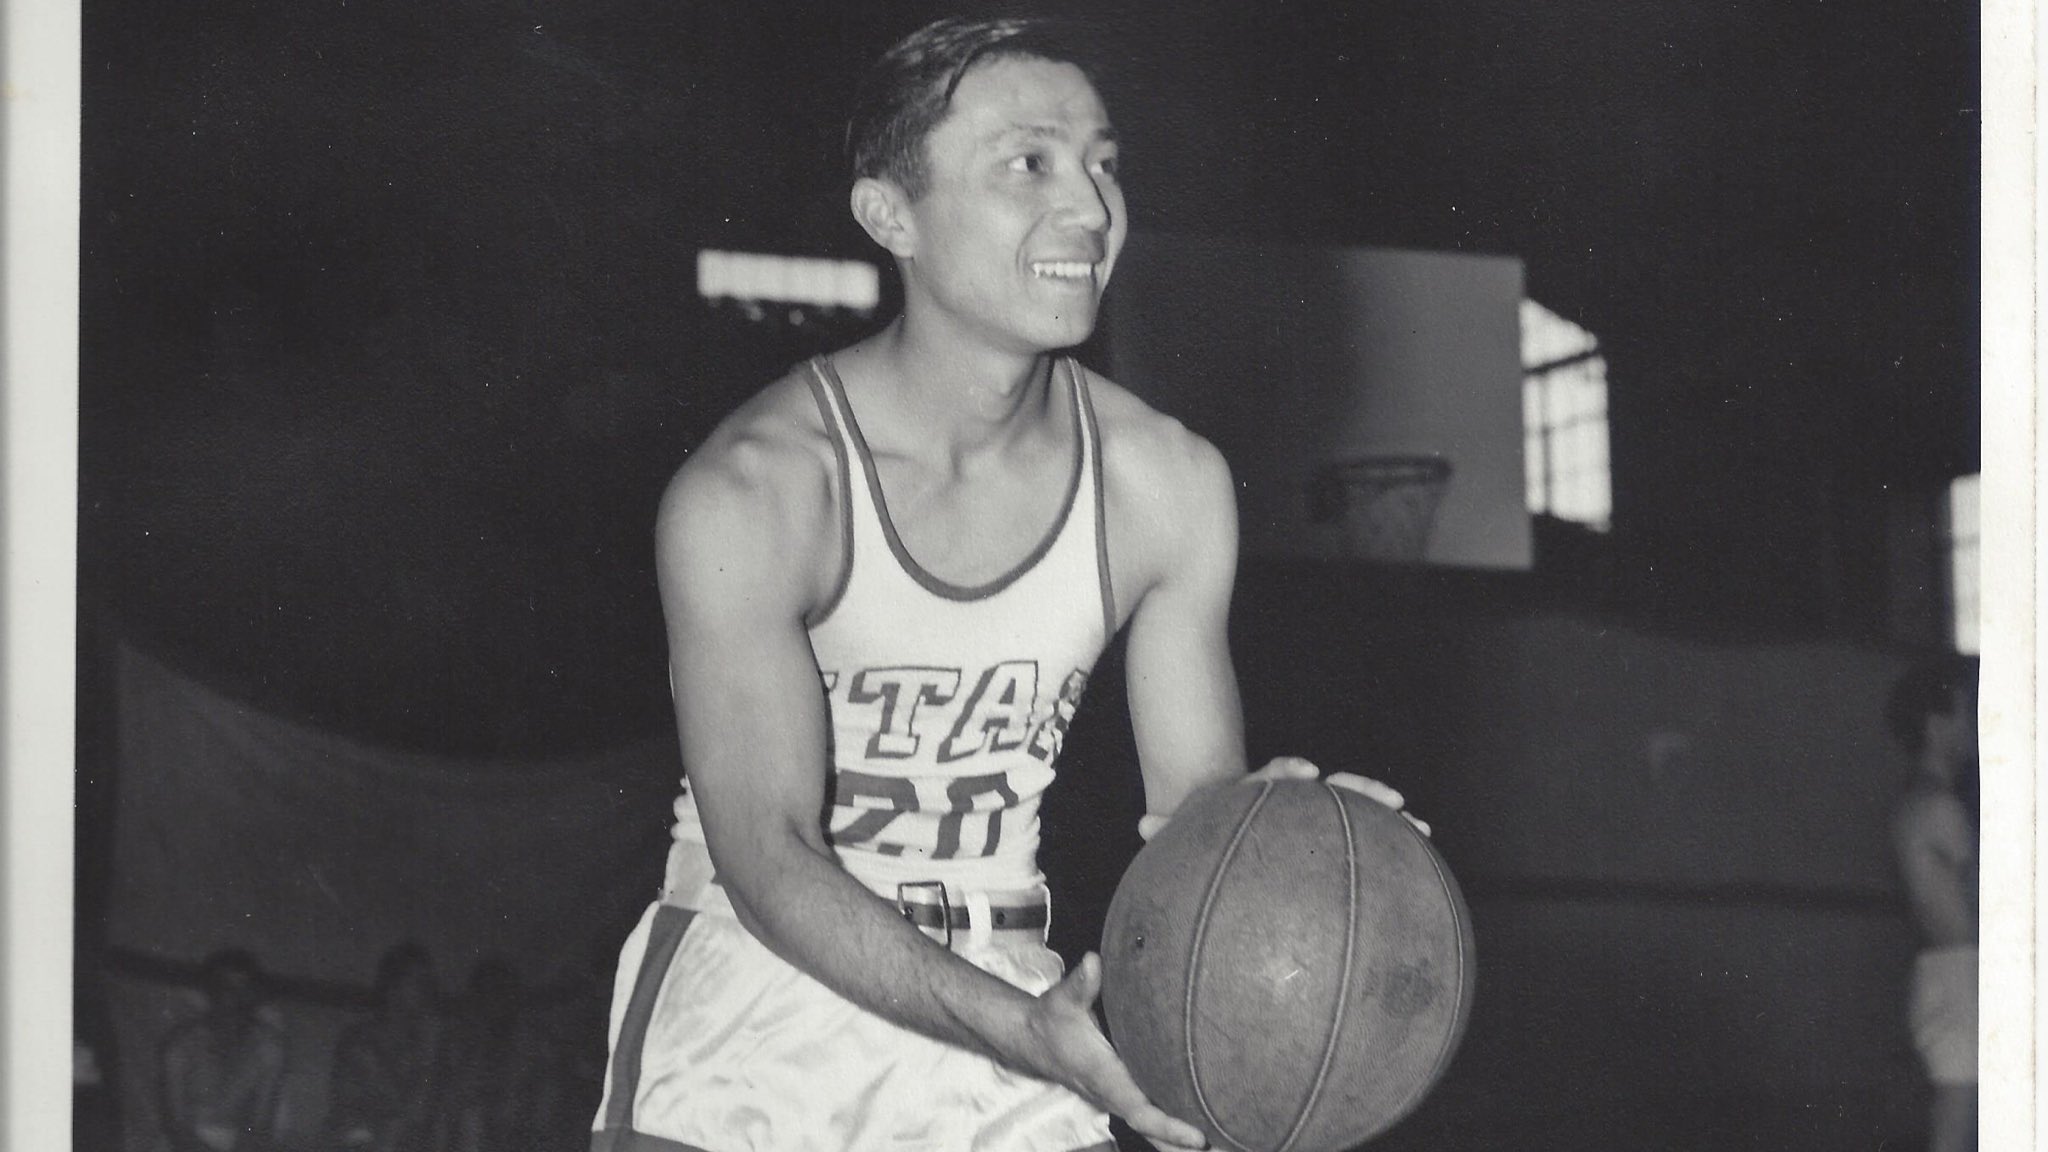 Wat Misaka, the first non-white professional basketball player